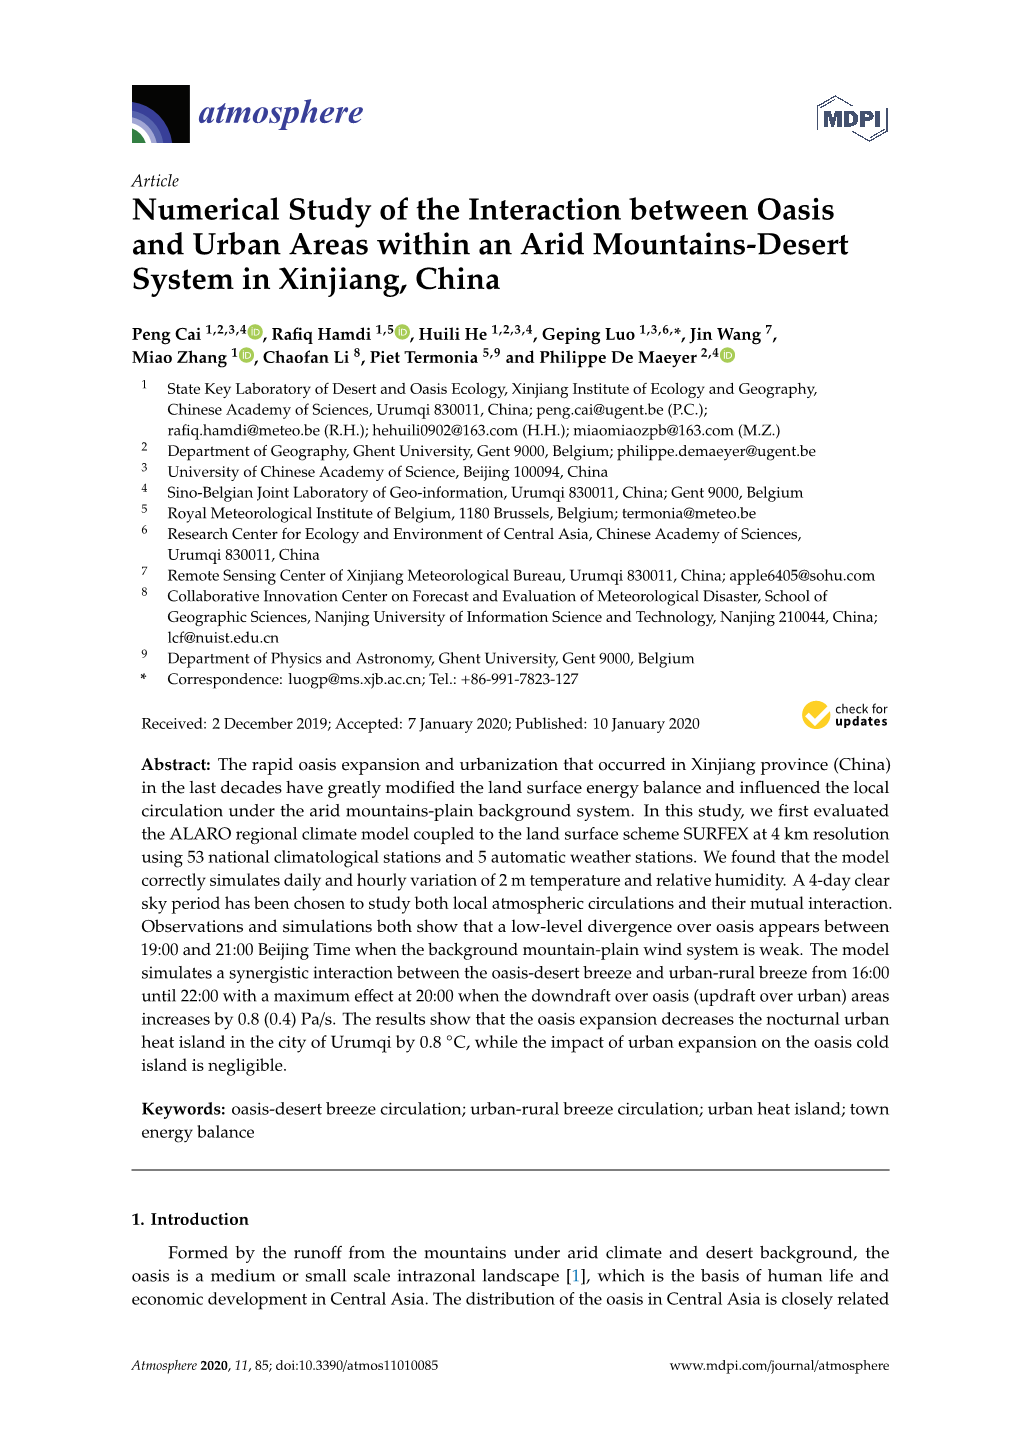 Numerical Study of the Interaction Between Oasis and Urban Areas Within an Arid Mountains-Desert System in Xinjiang, China